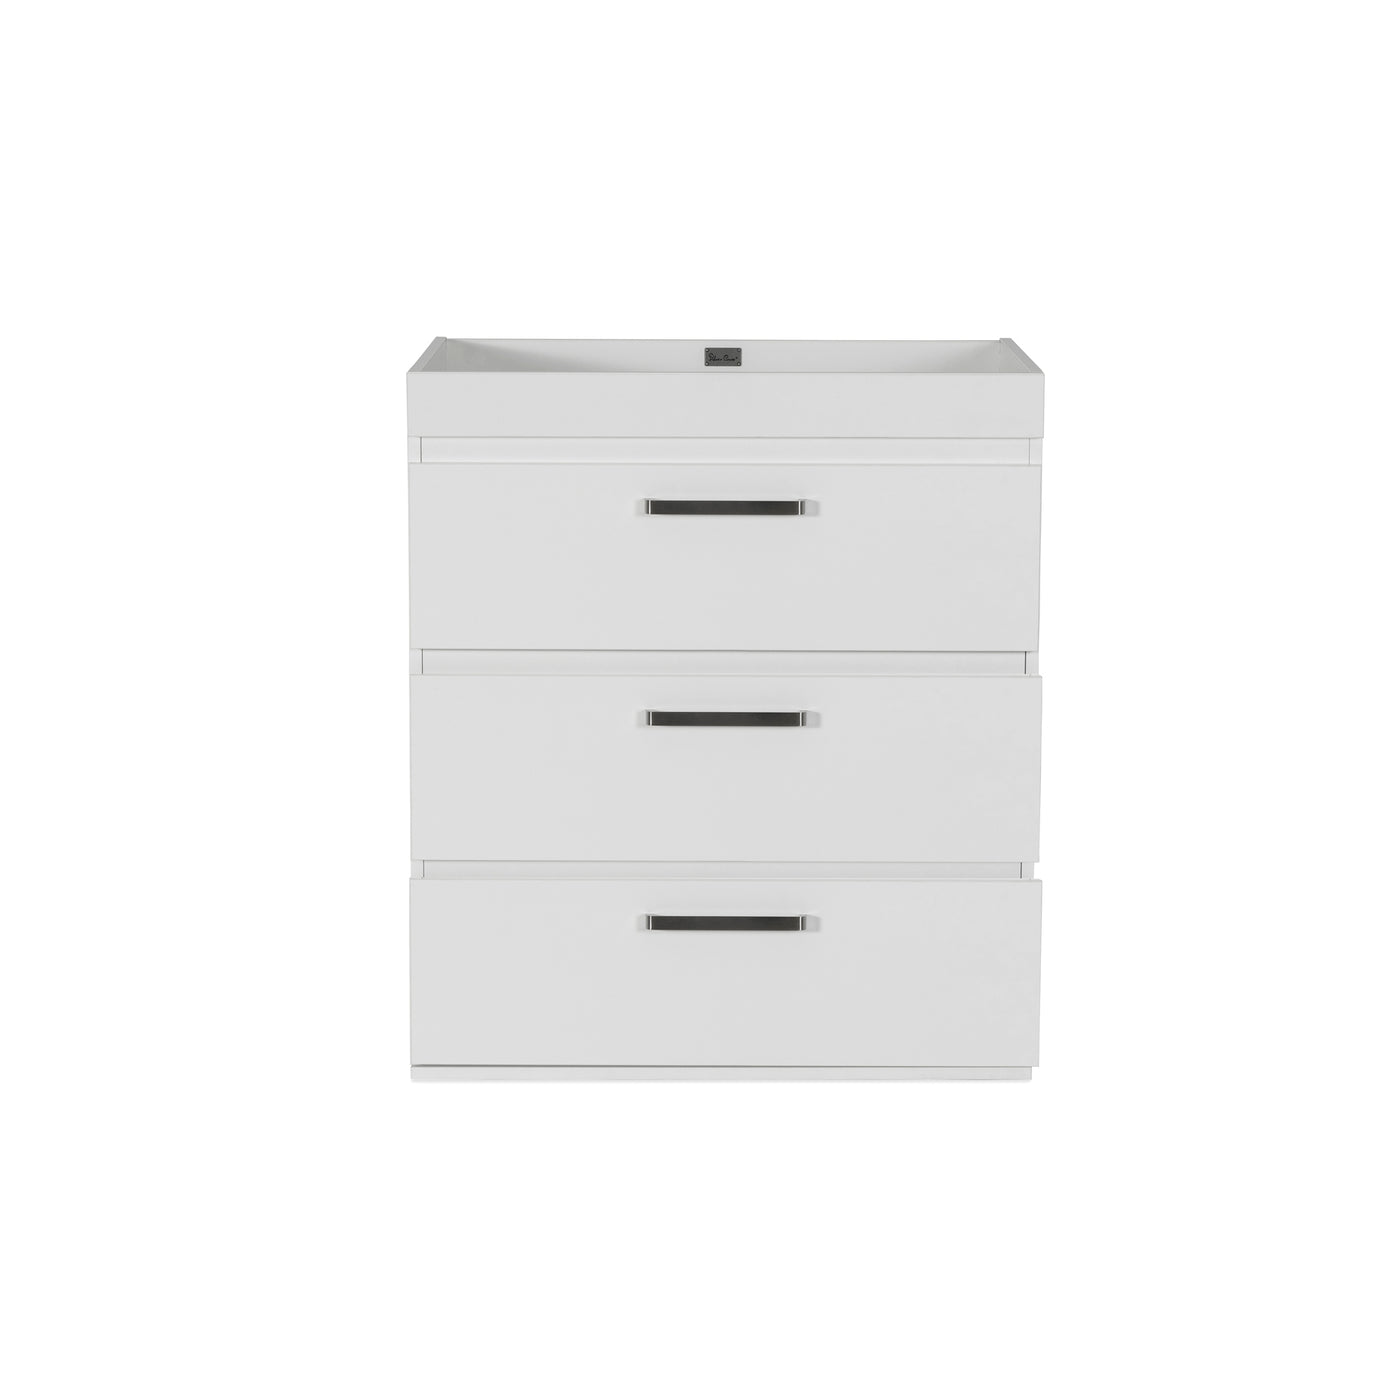 Silver Cross 3 Piece Furniture Set - Finchley White